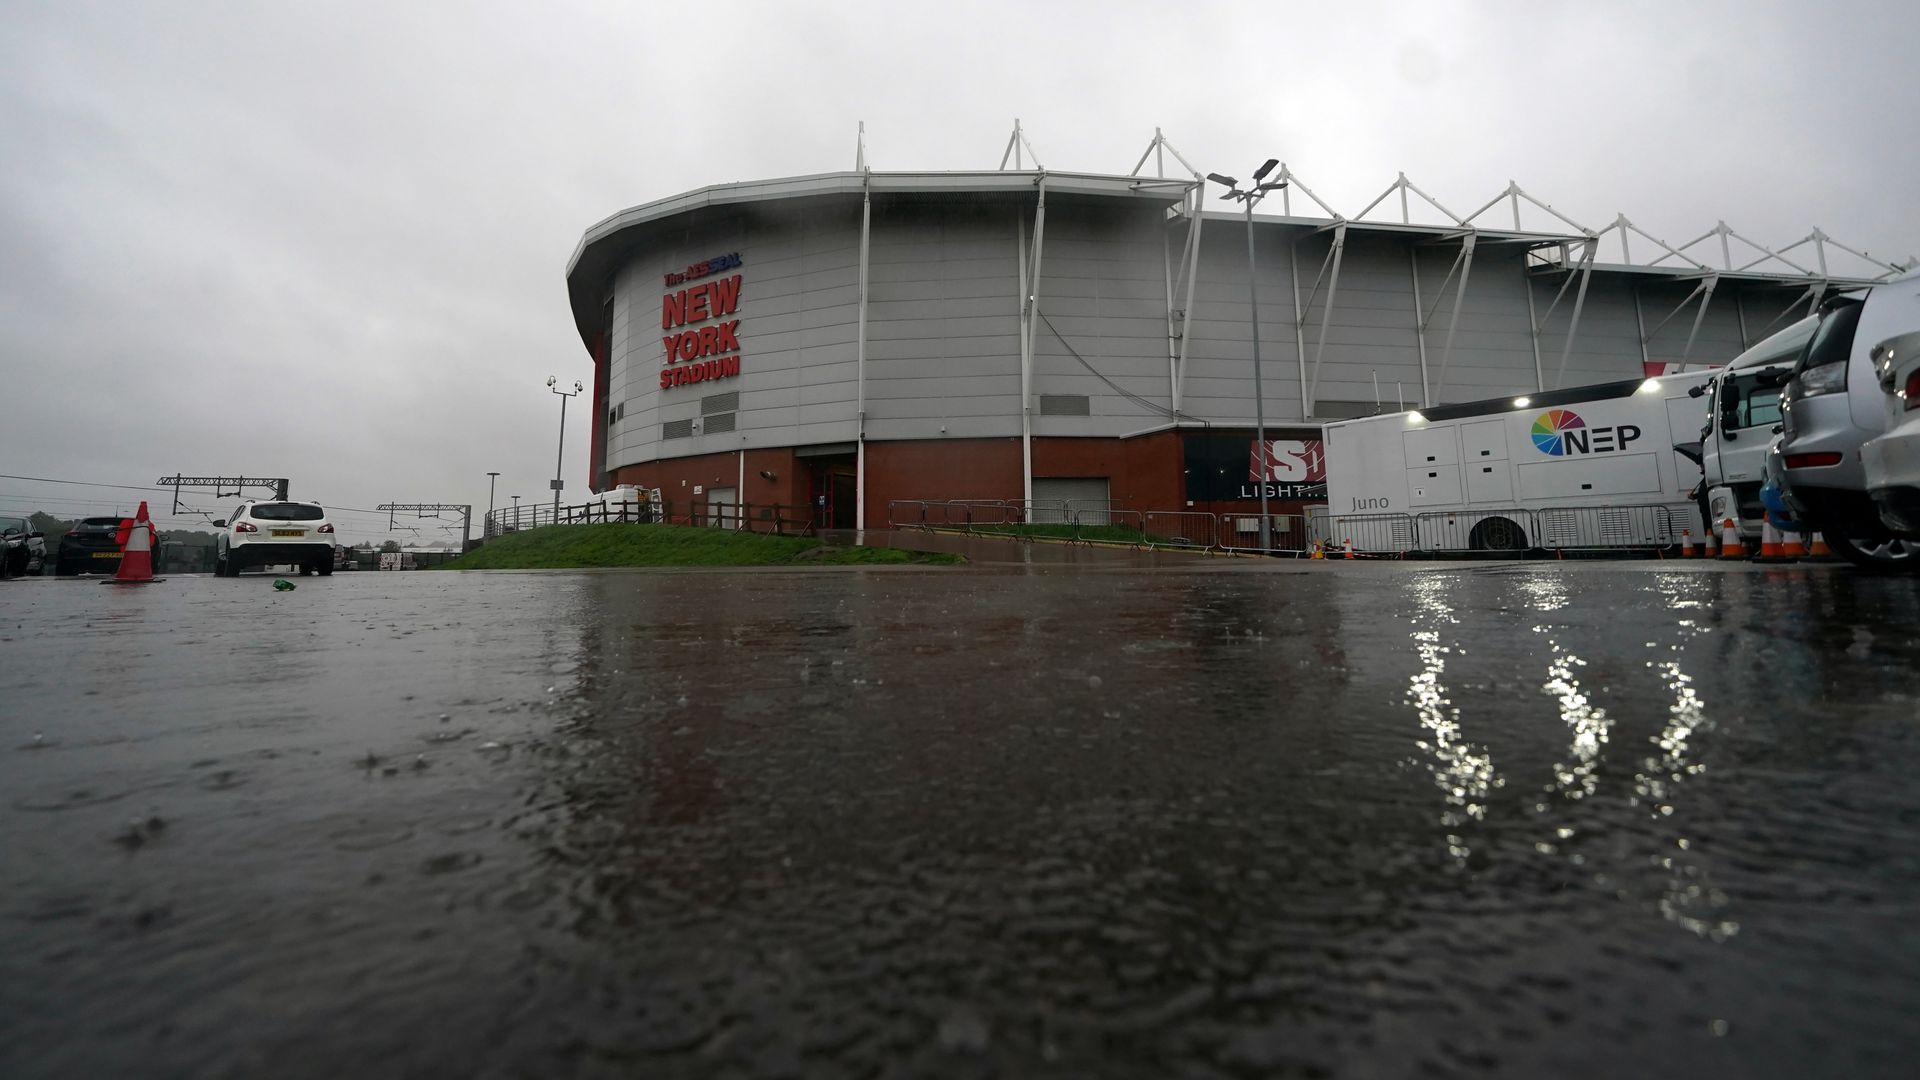 Rotherham vs Ipswich postponed due to flooding amid Storm Babet